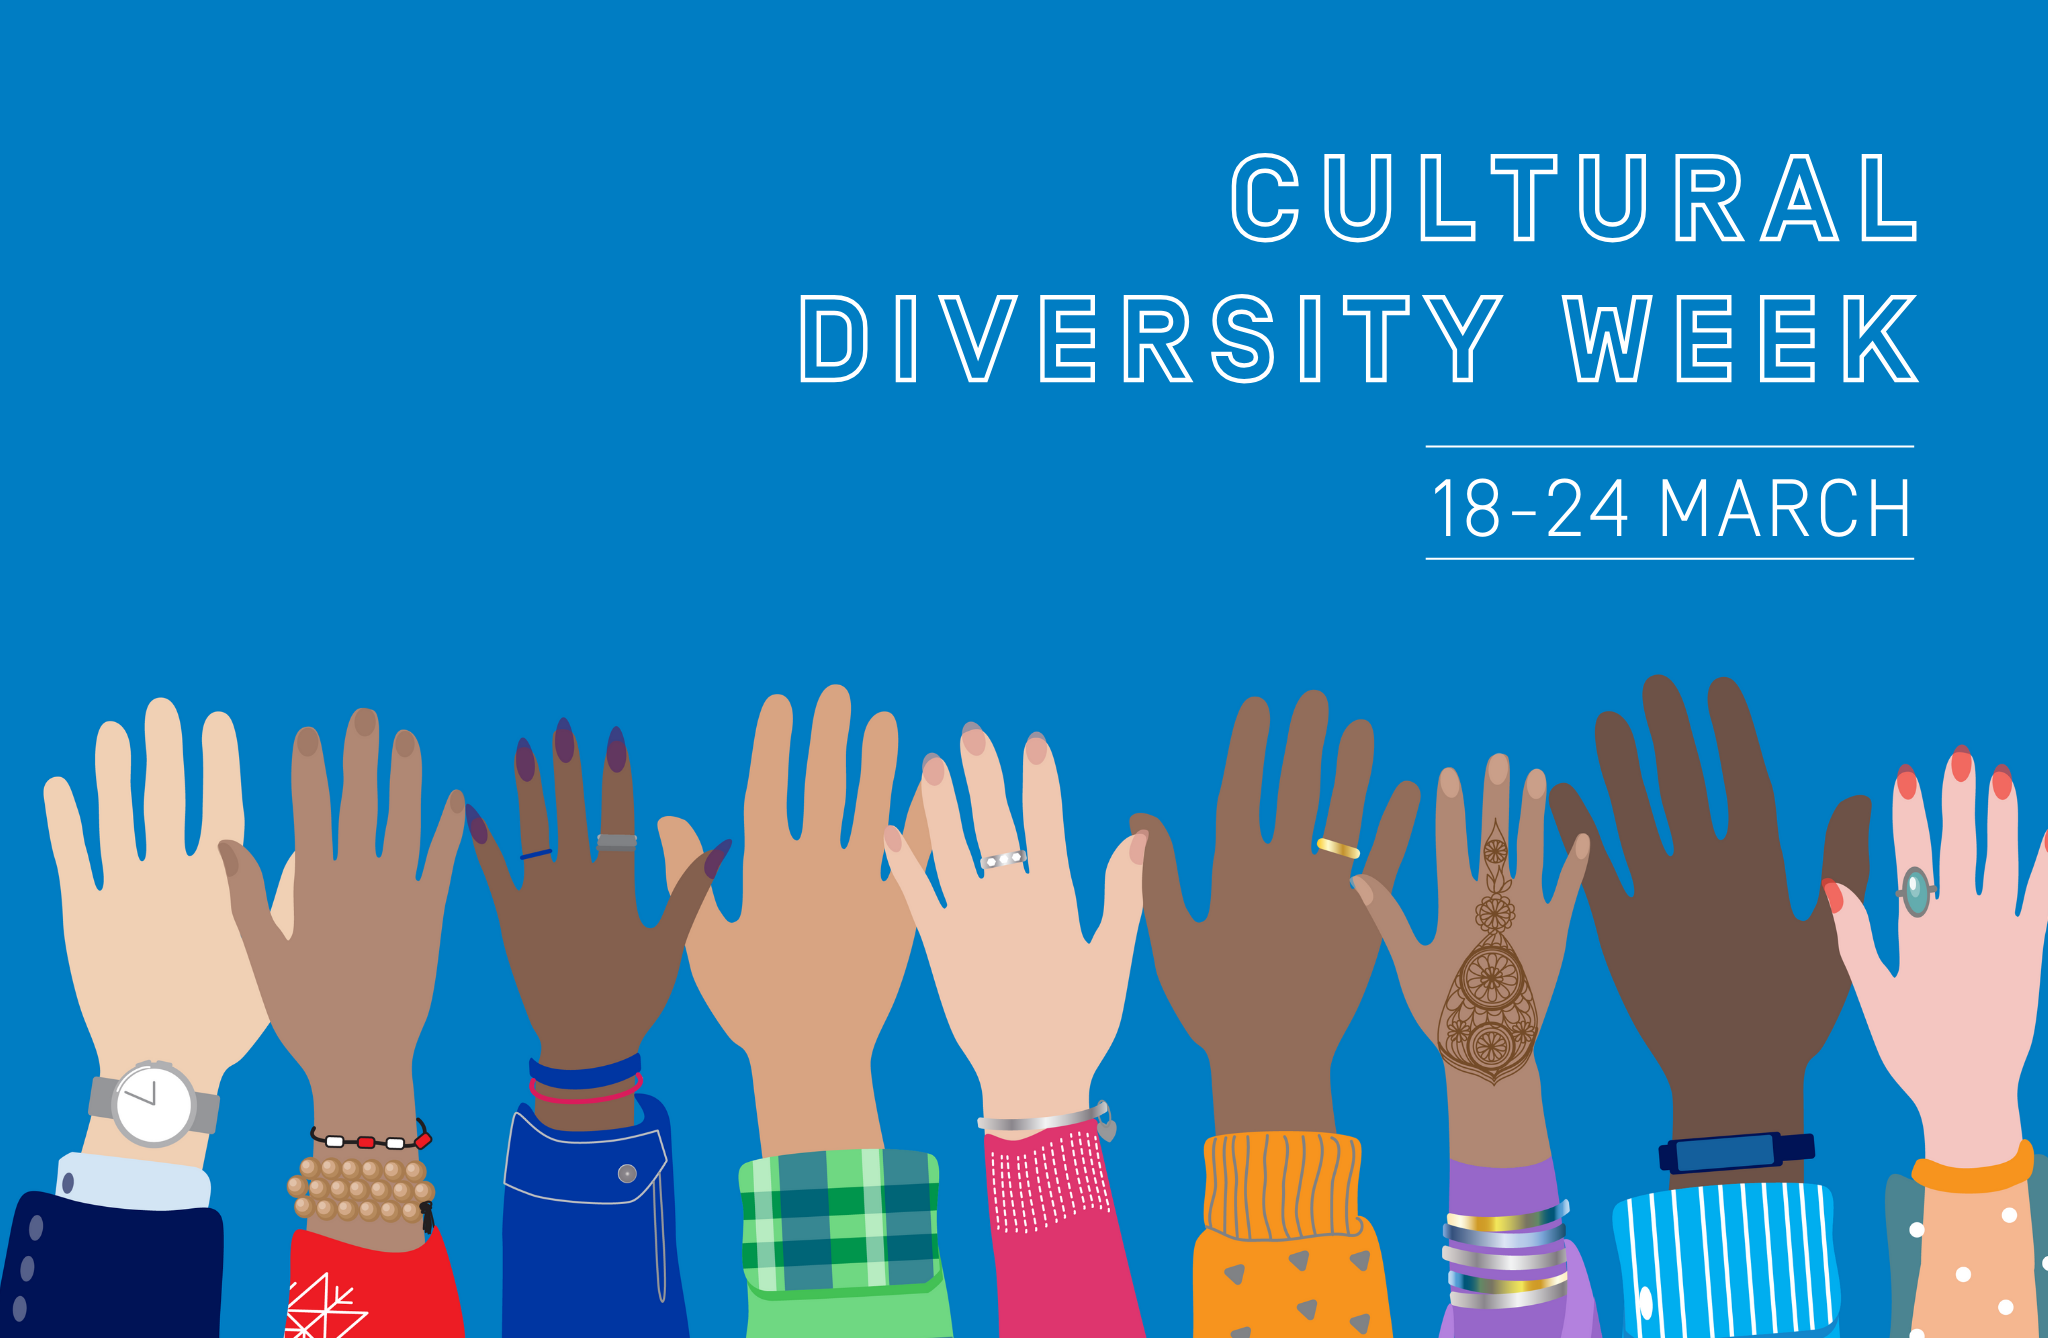 Bllue background, graphics of raised hands. TexCultural Diversity Week 18-24 March